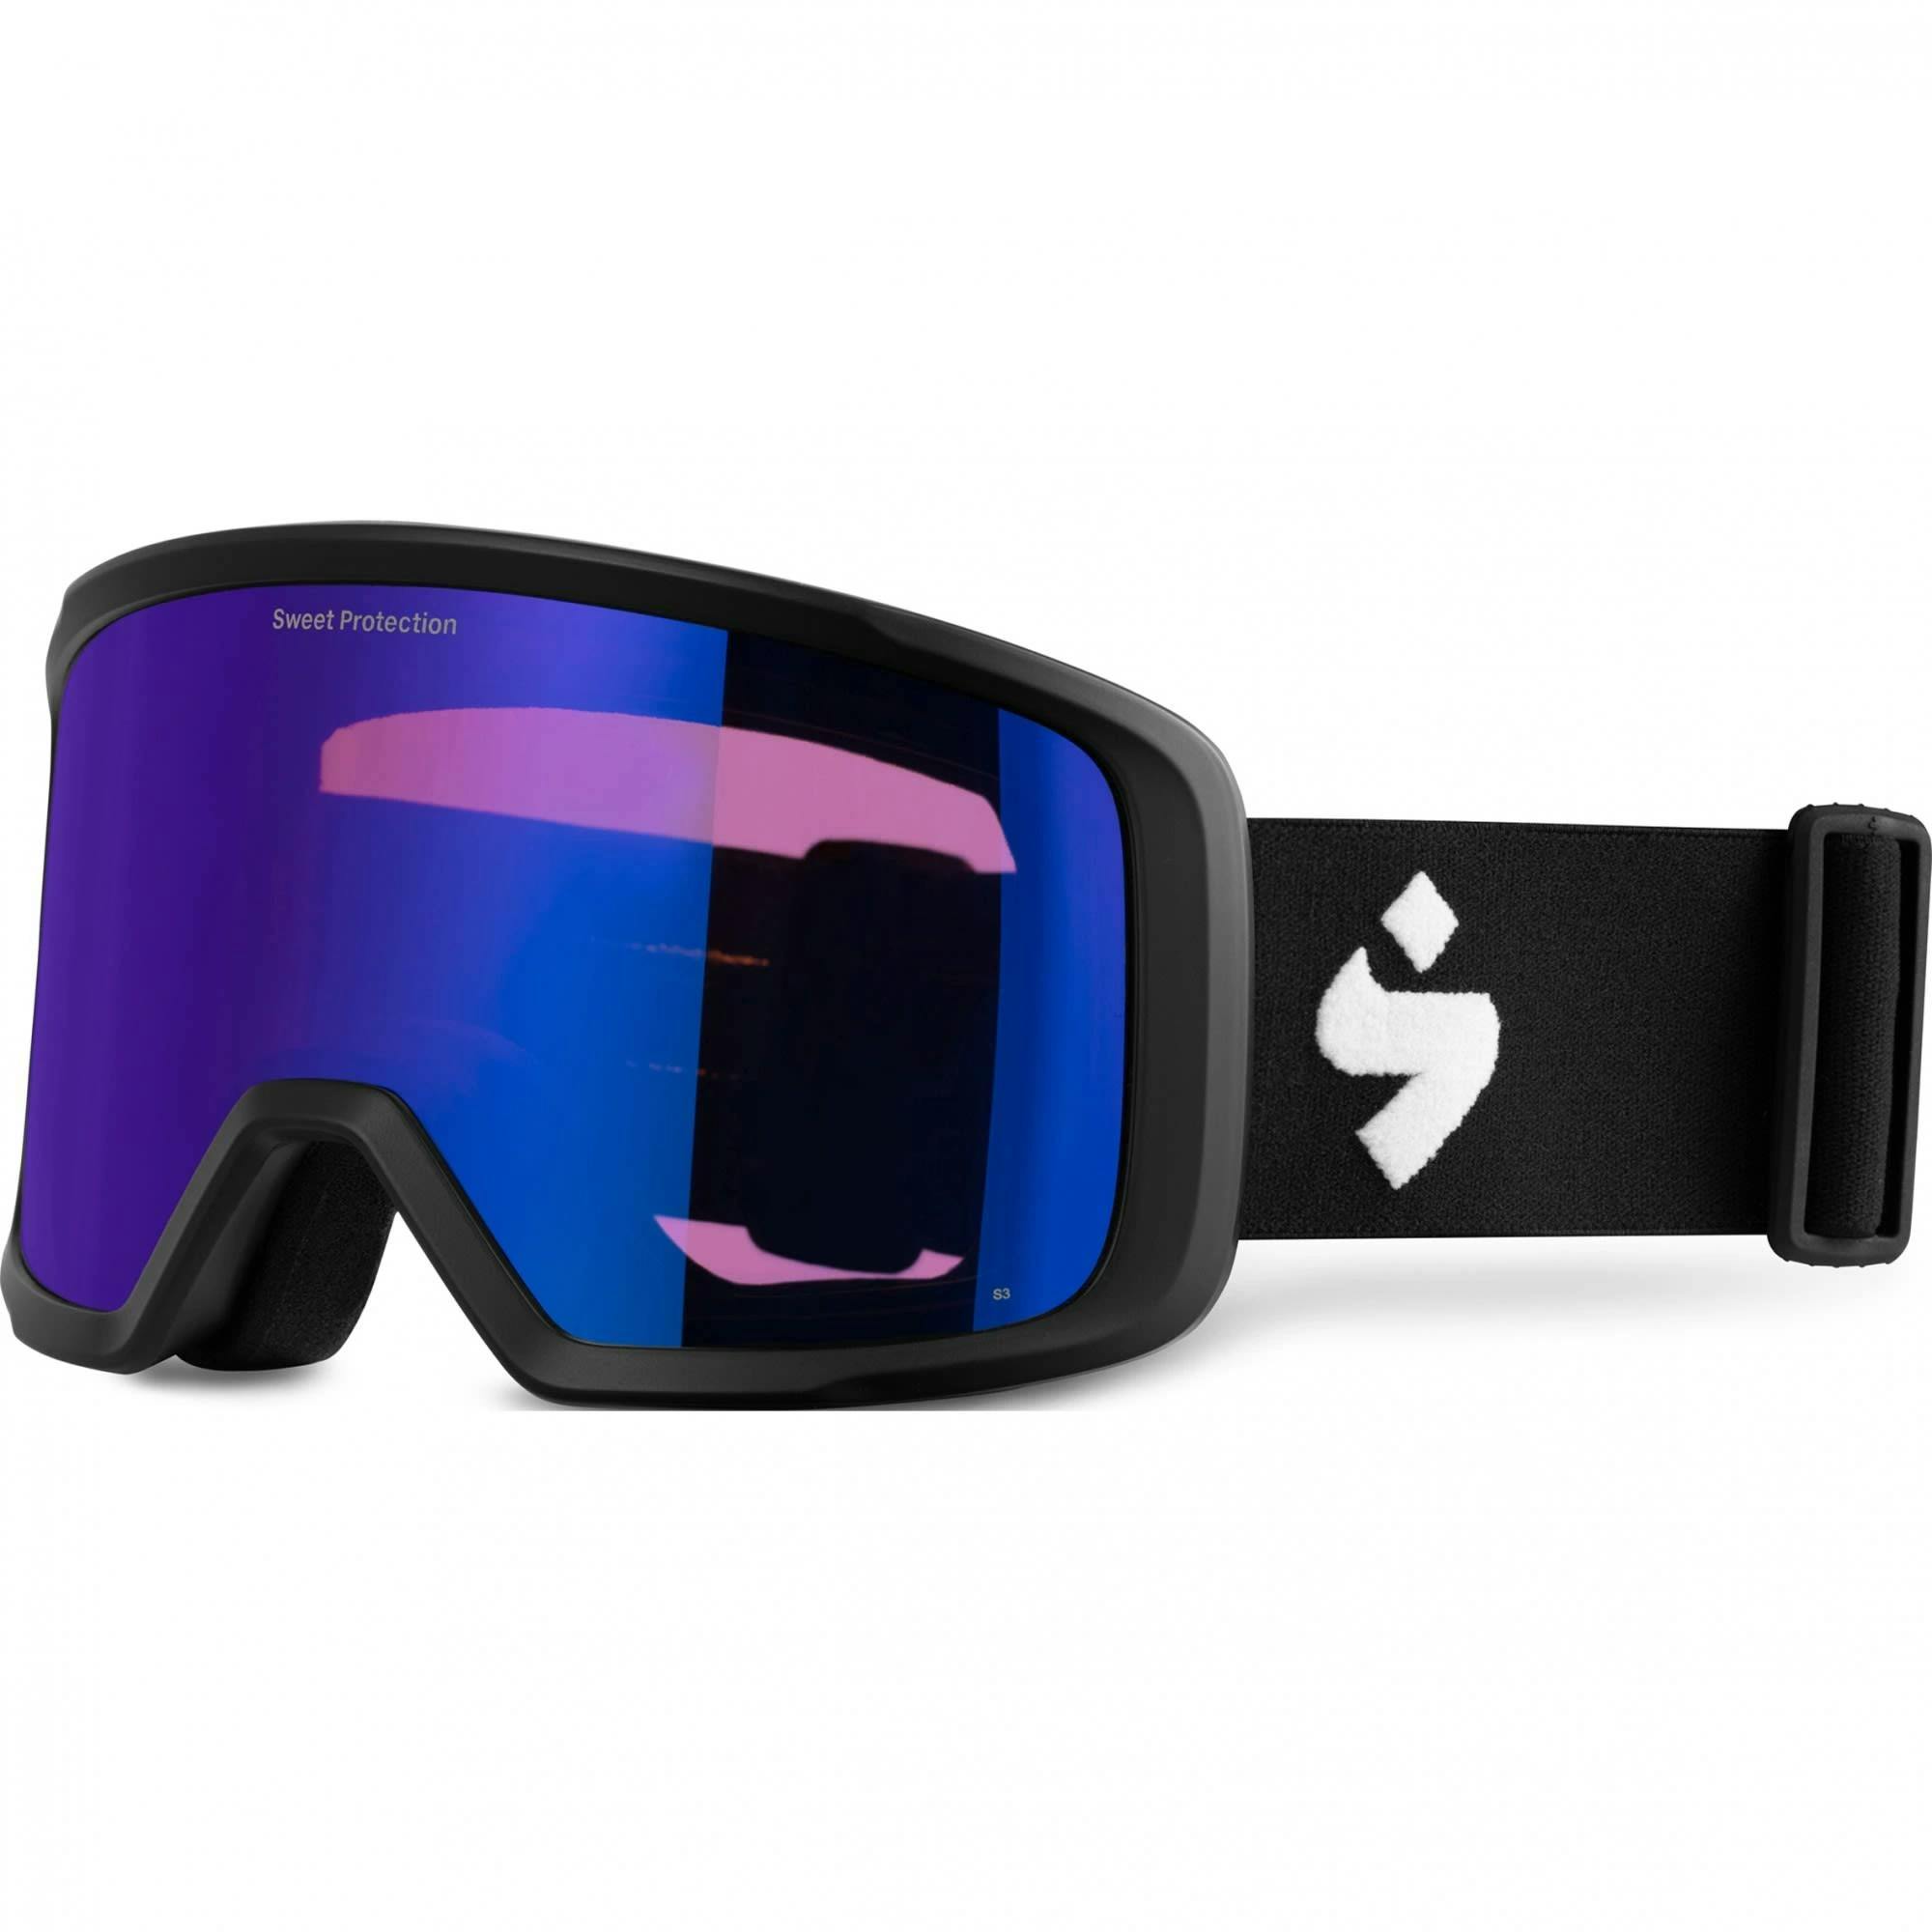 Sweet Protection Firewall Reflect Goggles